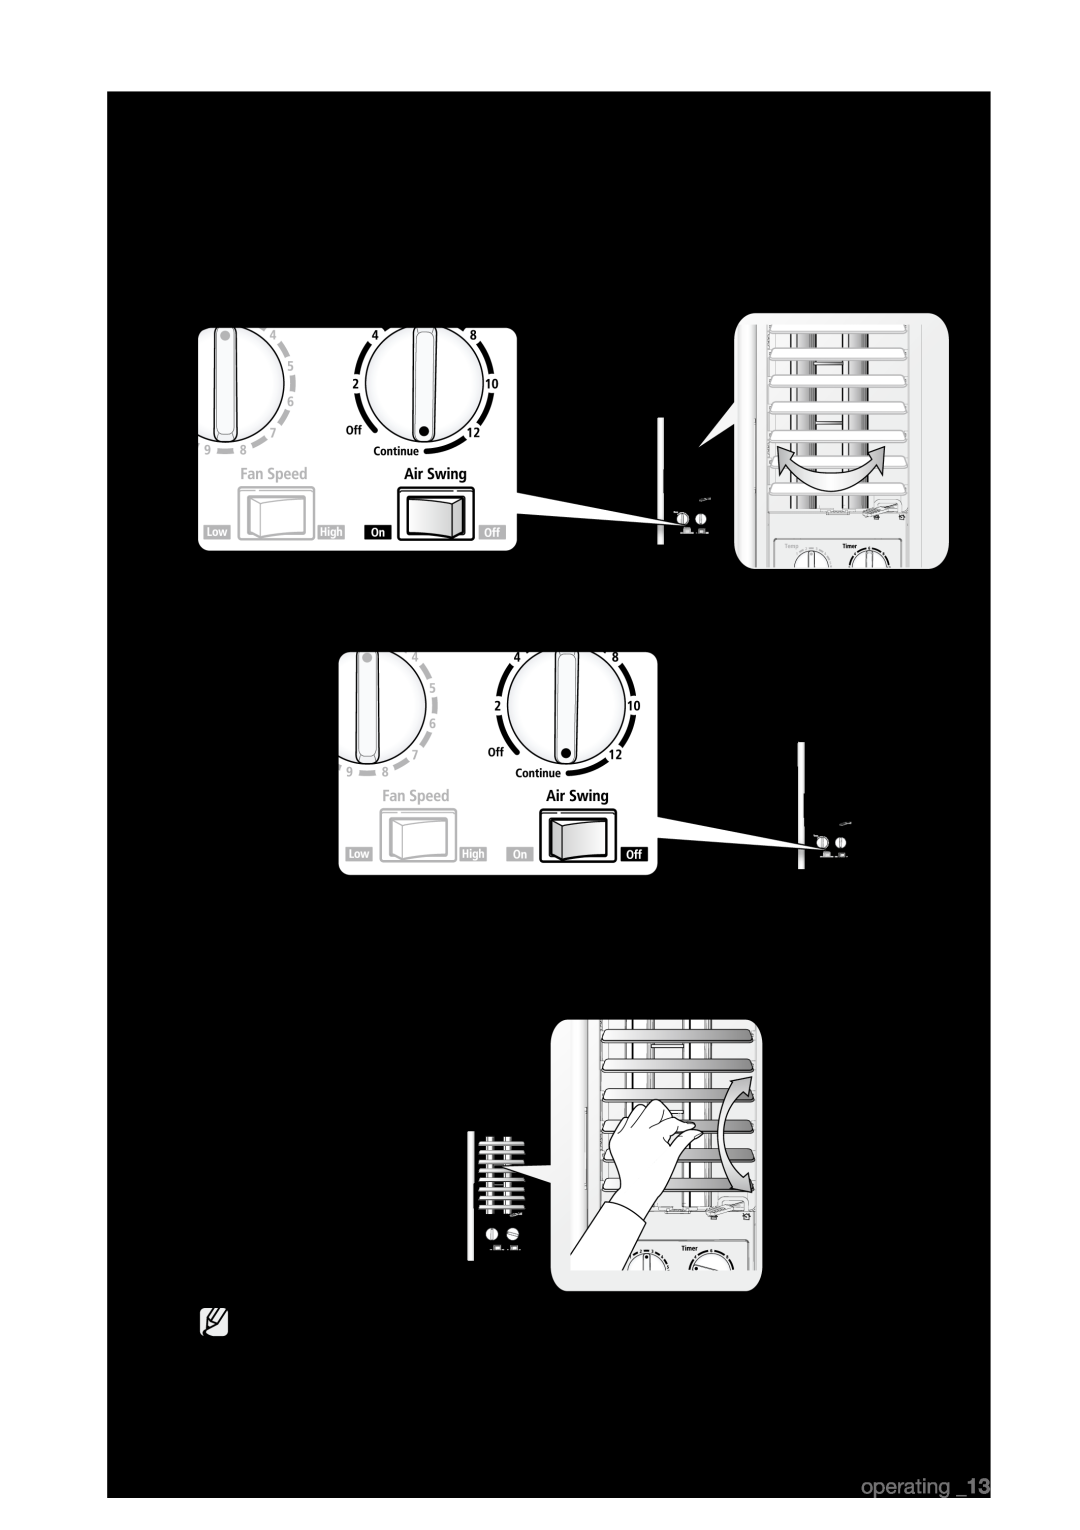 Samsung AW09L2, AW07L2 user manual Adjusting The Air Flow Direction, Horizontal air flow, Vertical air flow, operating _13 